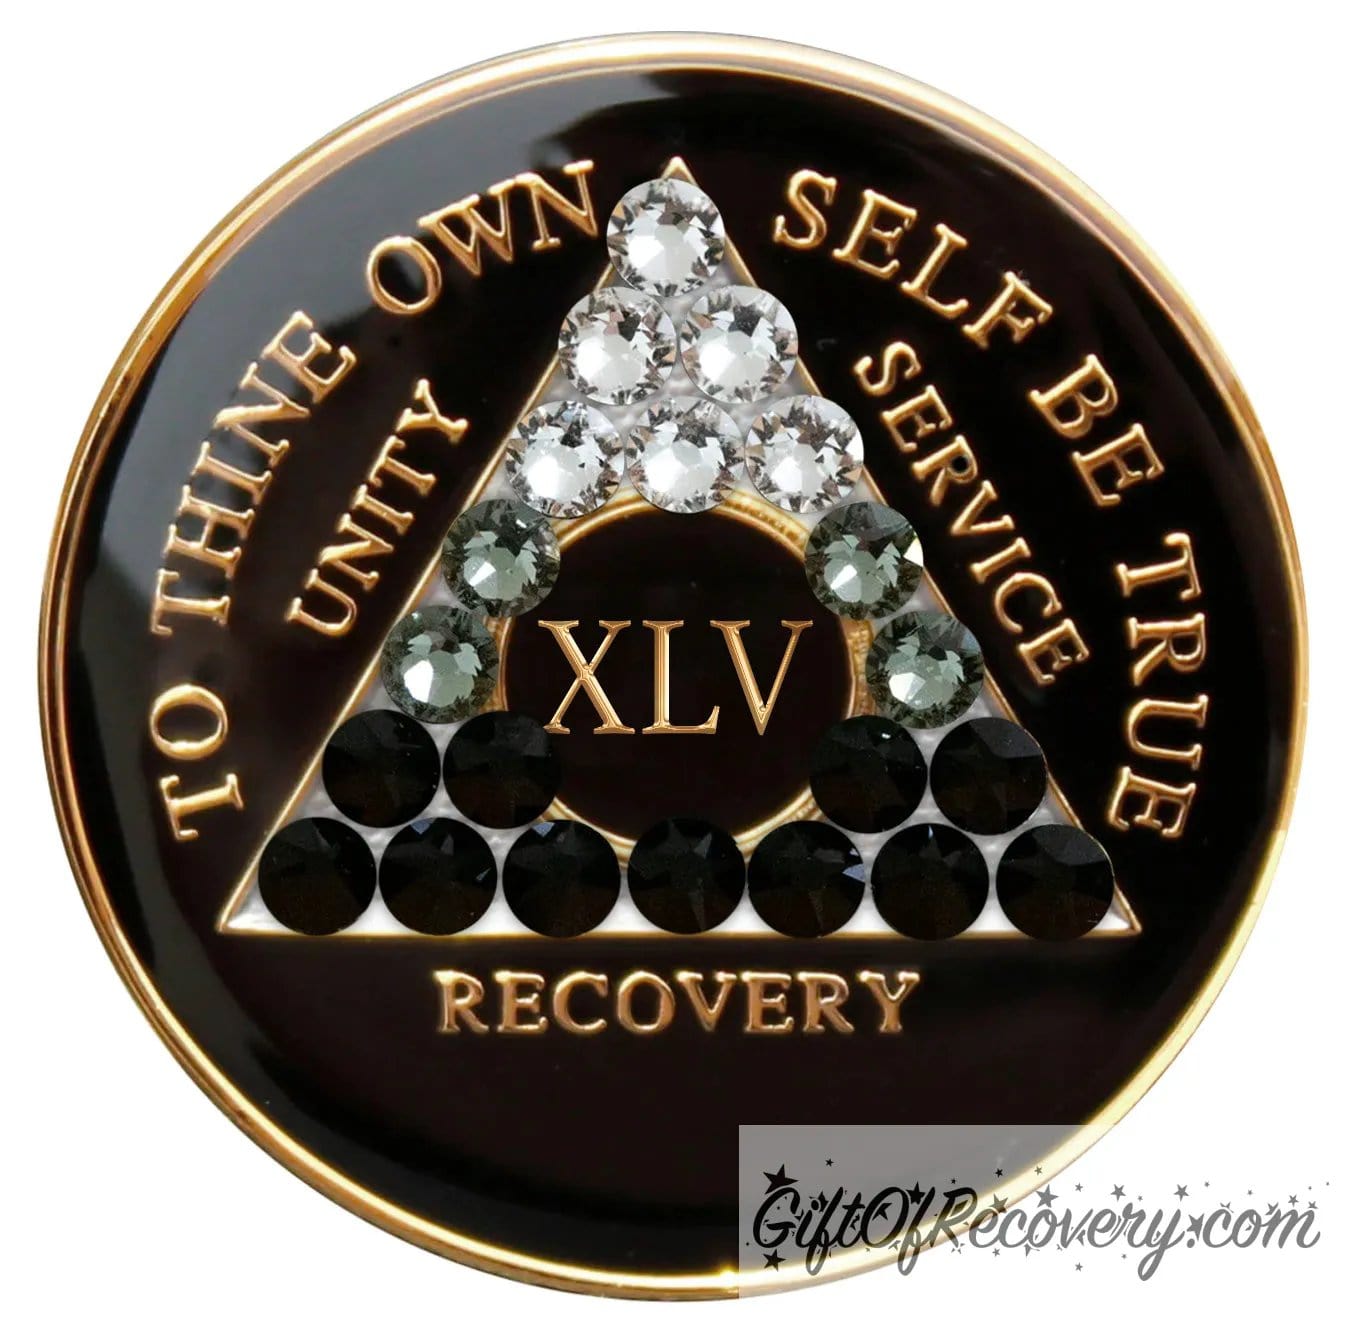 45 year AA recovery medallion black onyx with 21 genuine crystals ranging from clear to grey, to black, representing the transformation of the recovery journey, the AA moto along with unity, service, recovery, roman numeral, and the outer rim of medallion are embossed with 14k gold plated bras, the medallion is sealed in resin for a glossy finish.